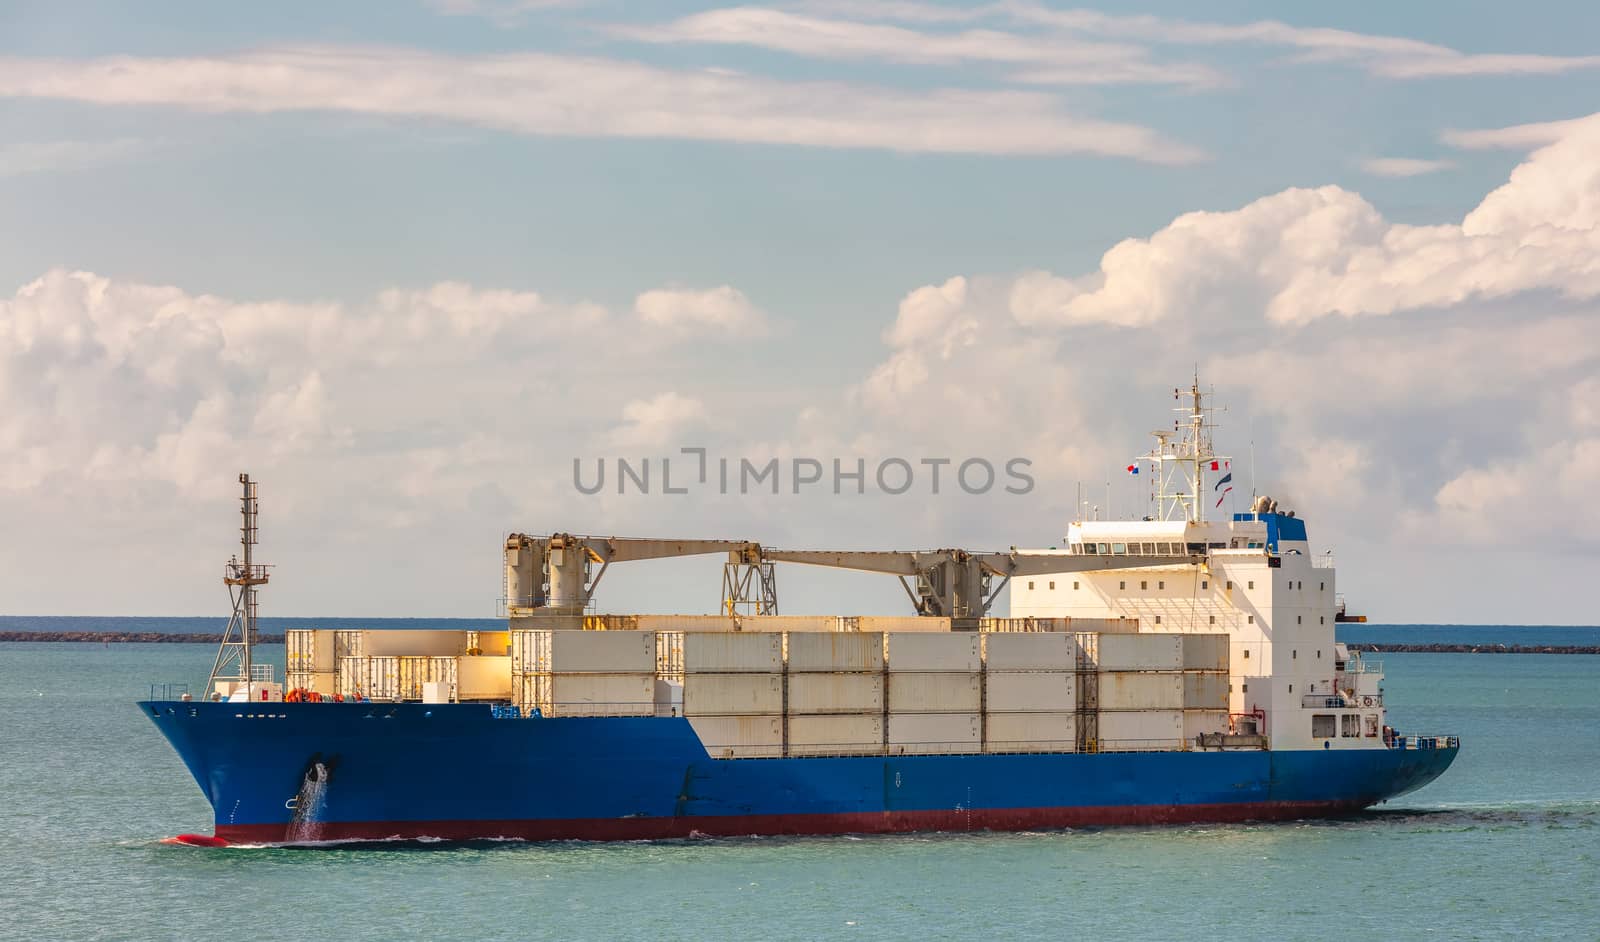 Cargo ship in Panama Canal. Various containers and cranes on deck. Shipping industry concept. Clouds and blue sky as a background